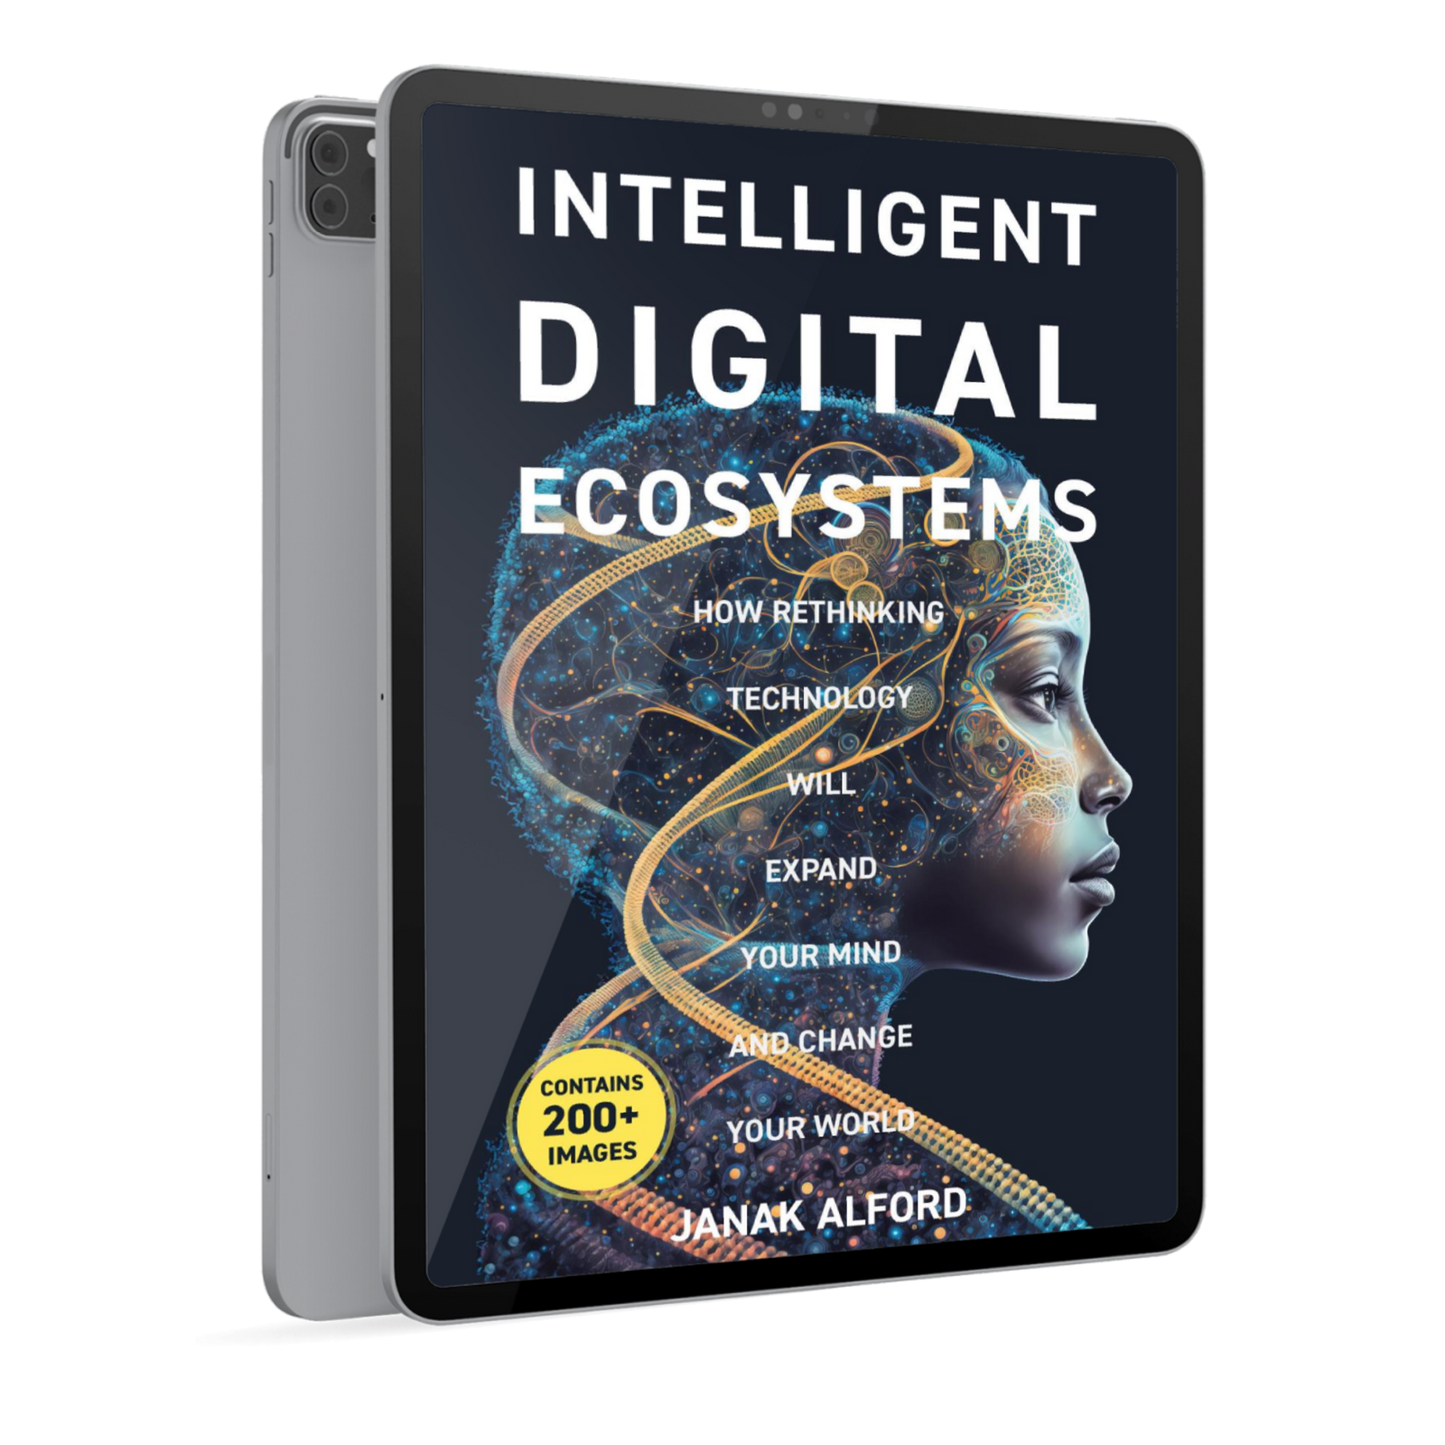 Intelligent Digital Ecosystems: How Rethinking Technology Will Expand Your Mind and Change Your World